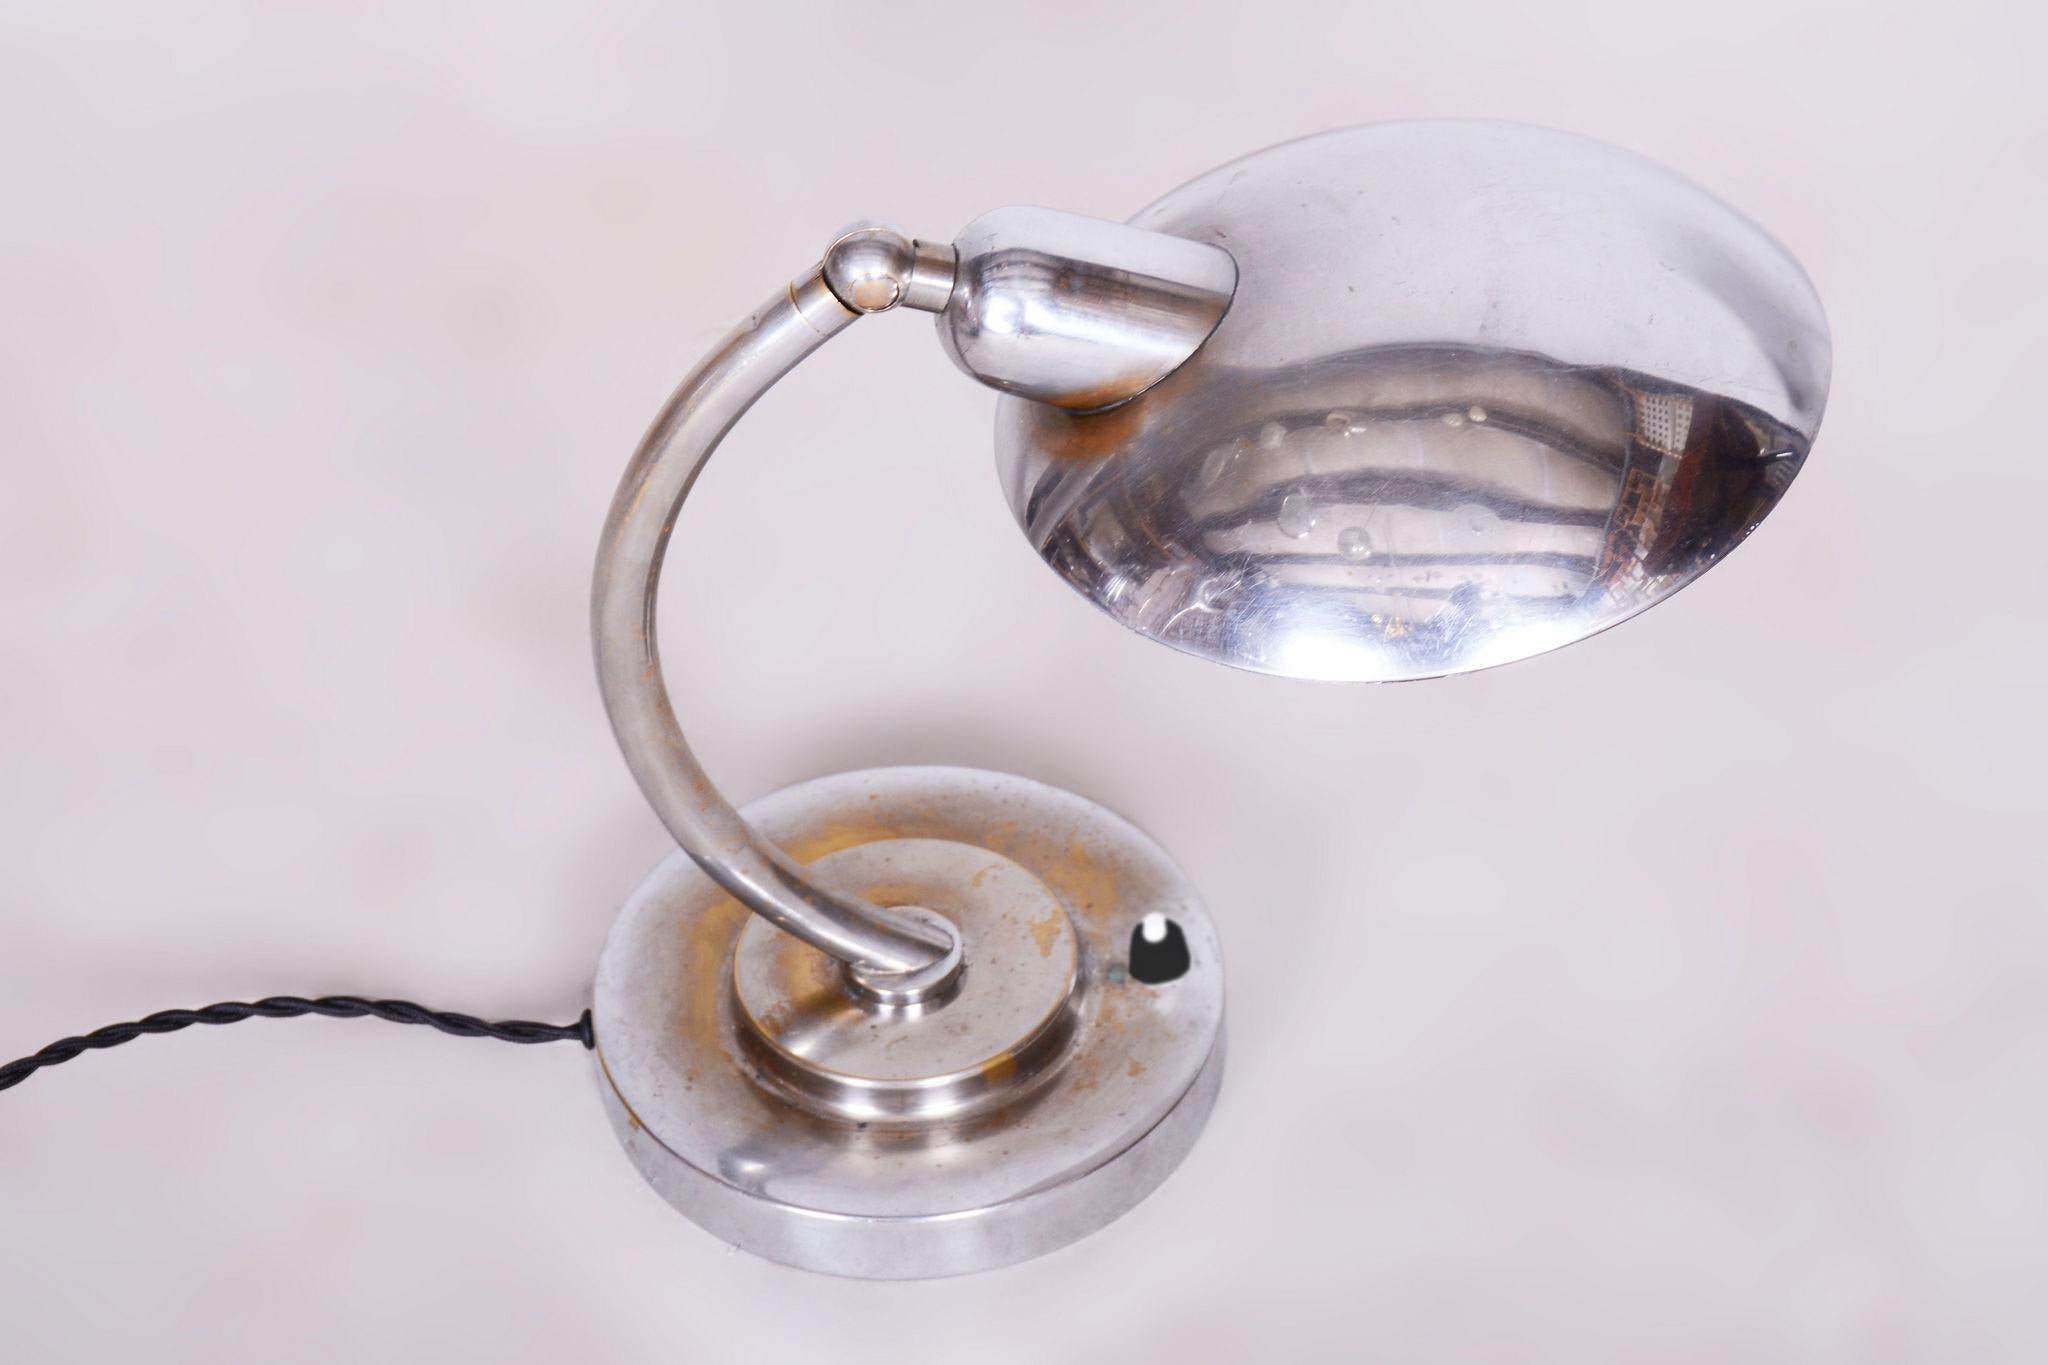 Restored Bauhaus Chrome Table Lamp, F. Anyz, New Electrification, Czechia, 1920s For Sale 3